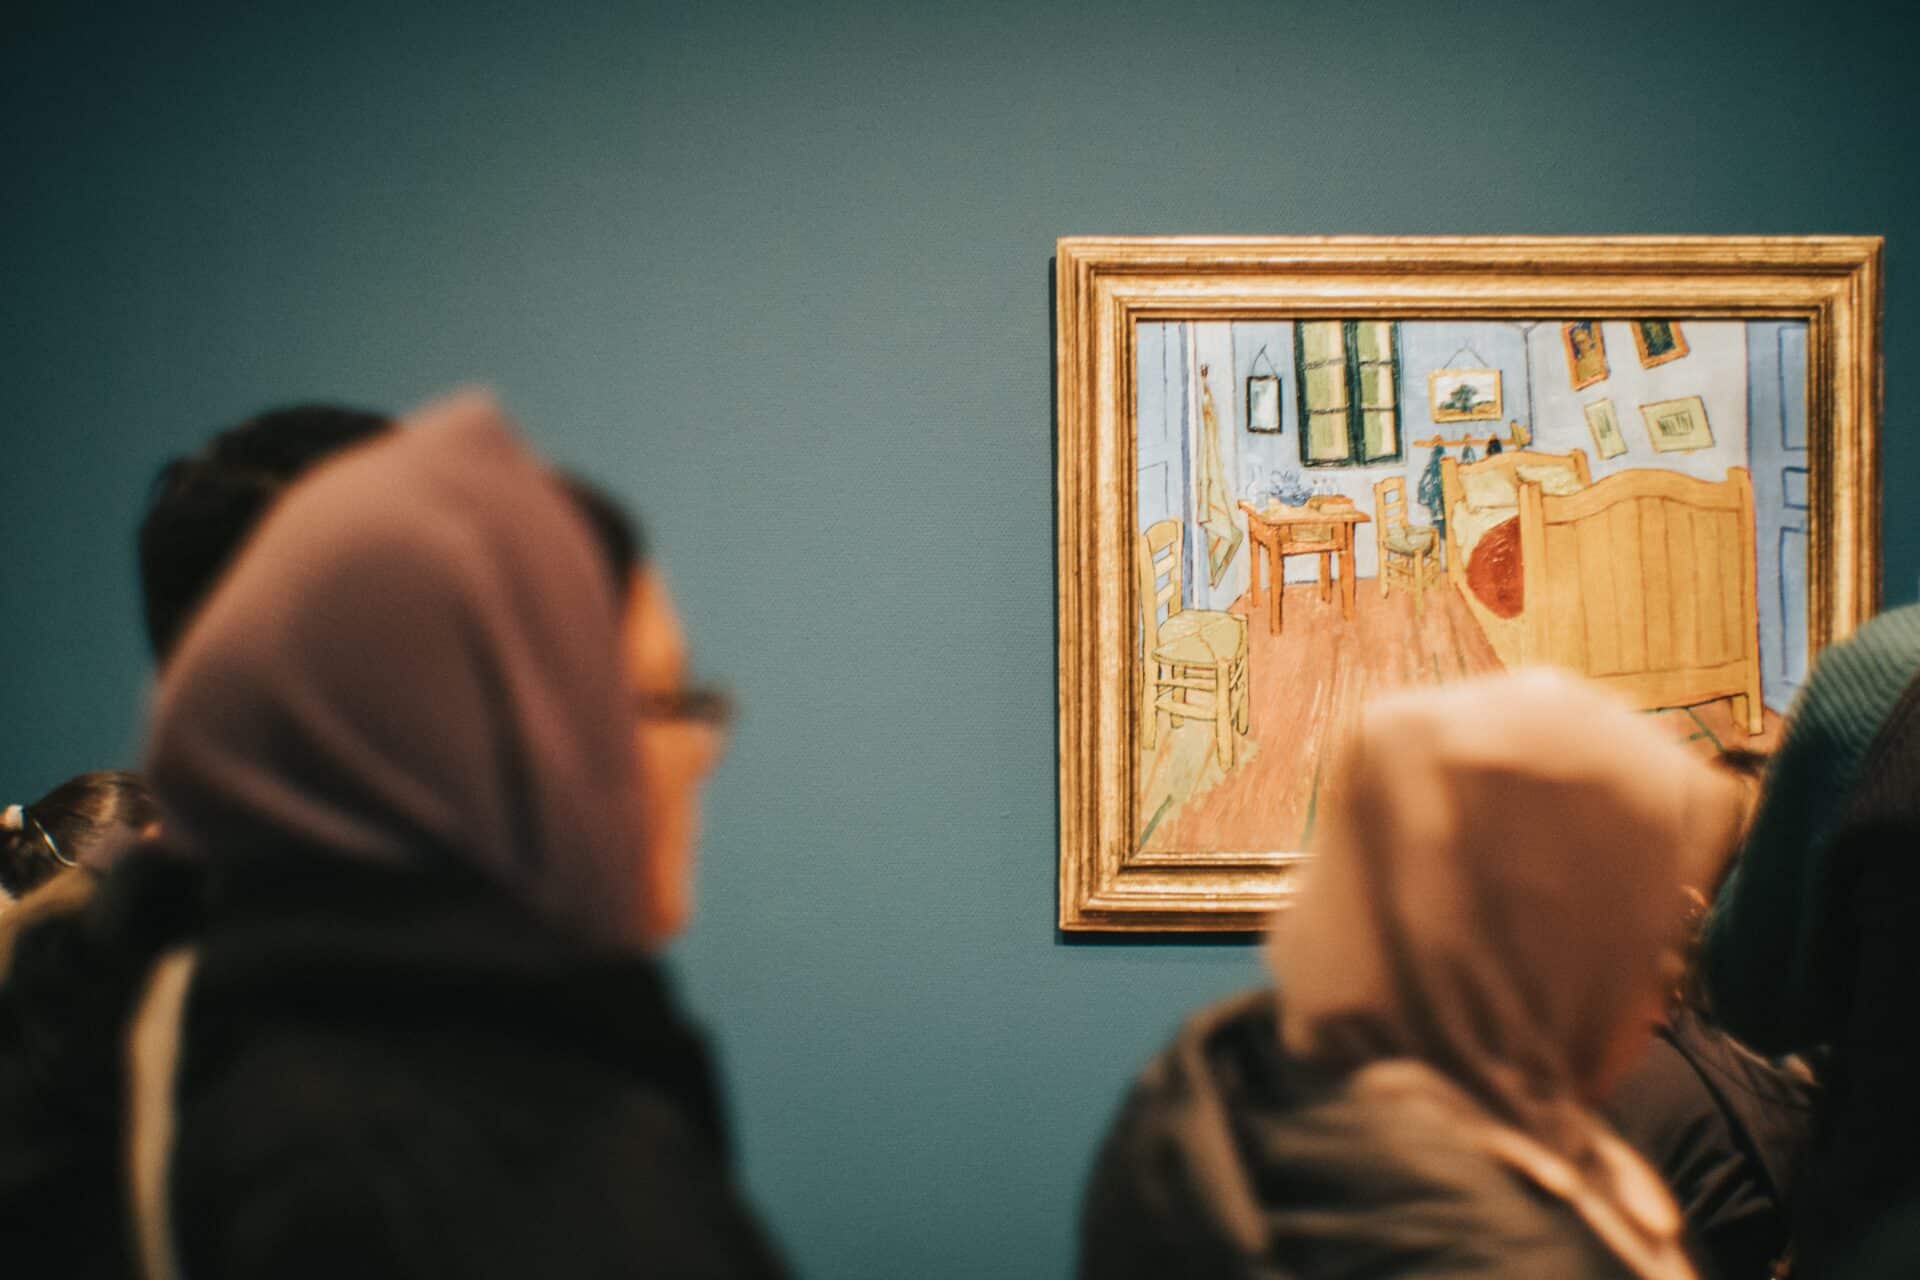 Visitors observing a framed painting in a gallery.